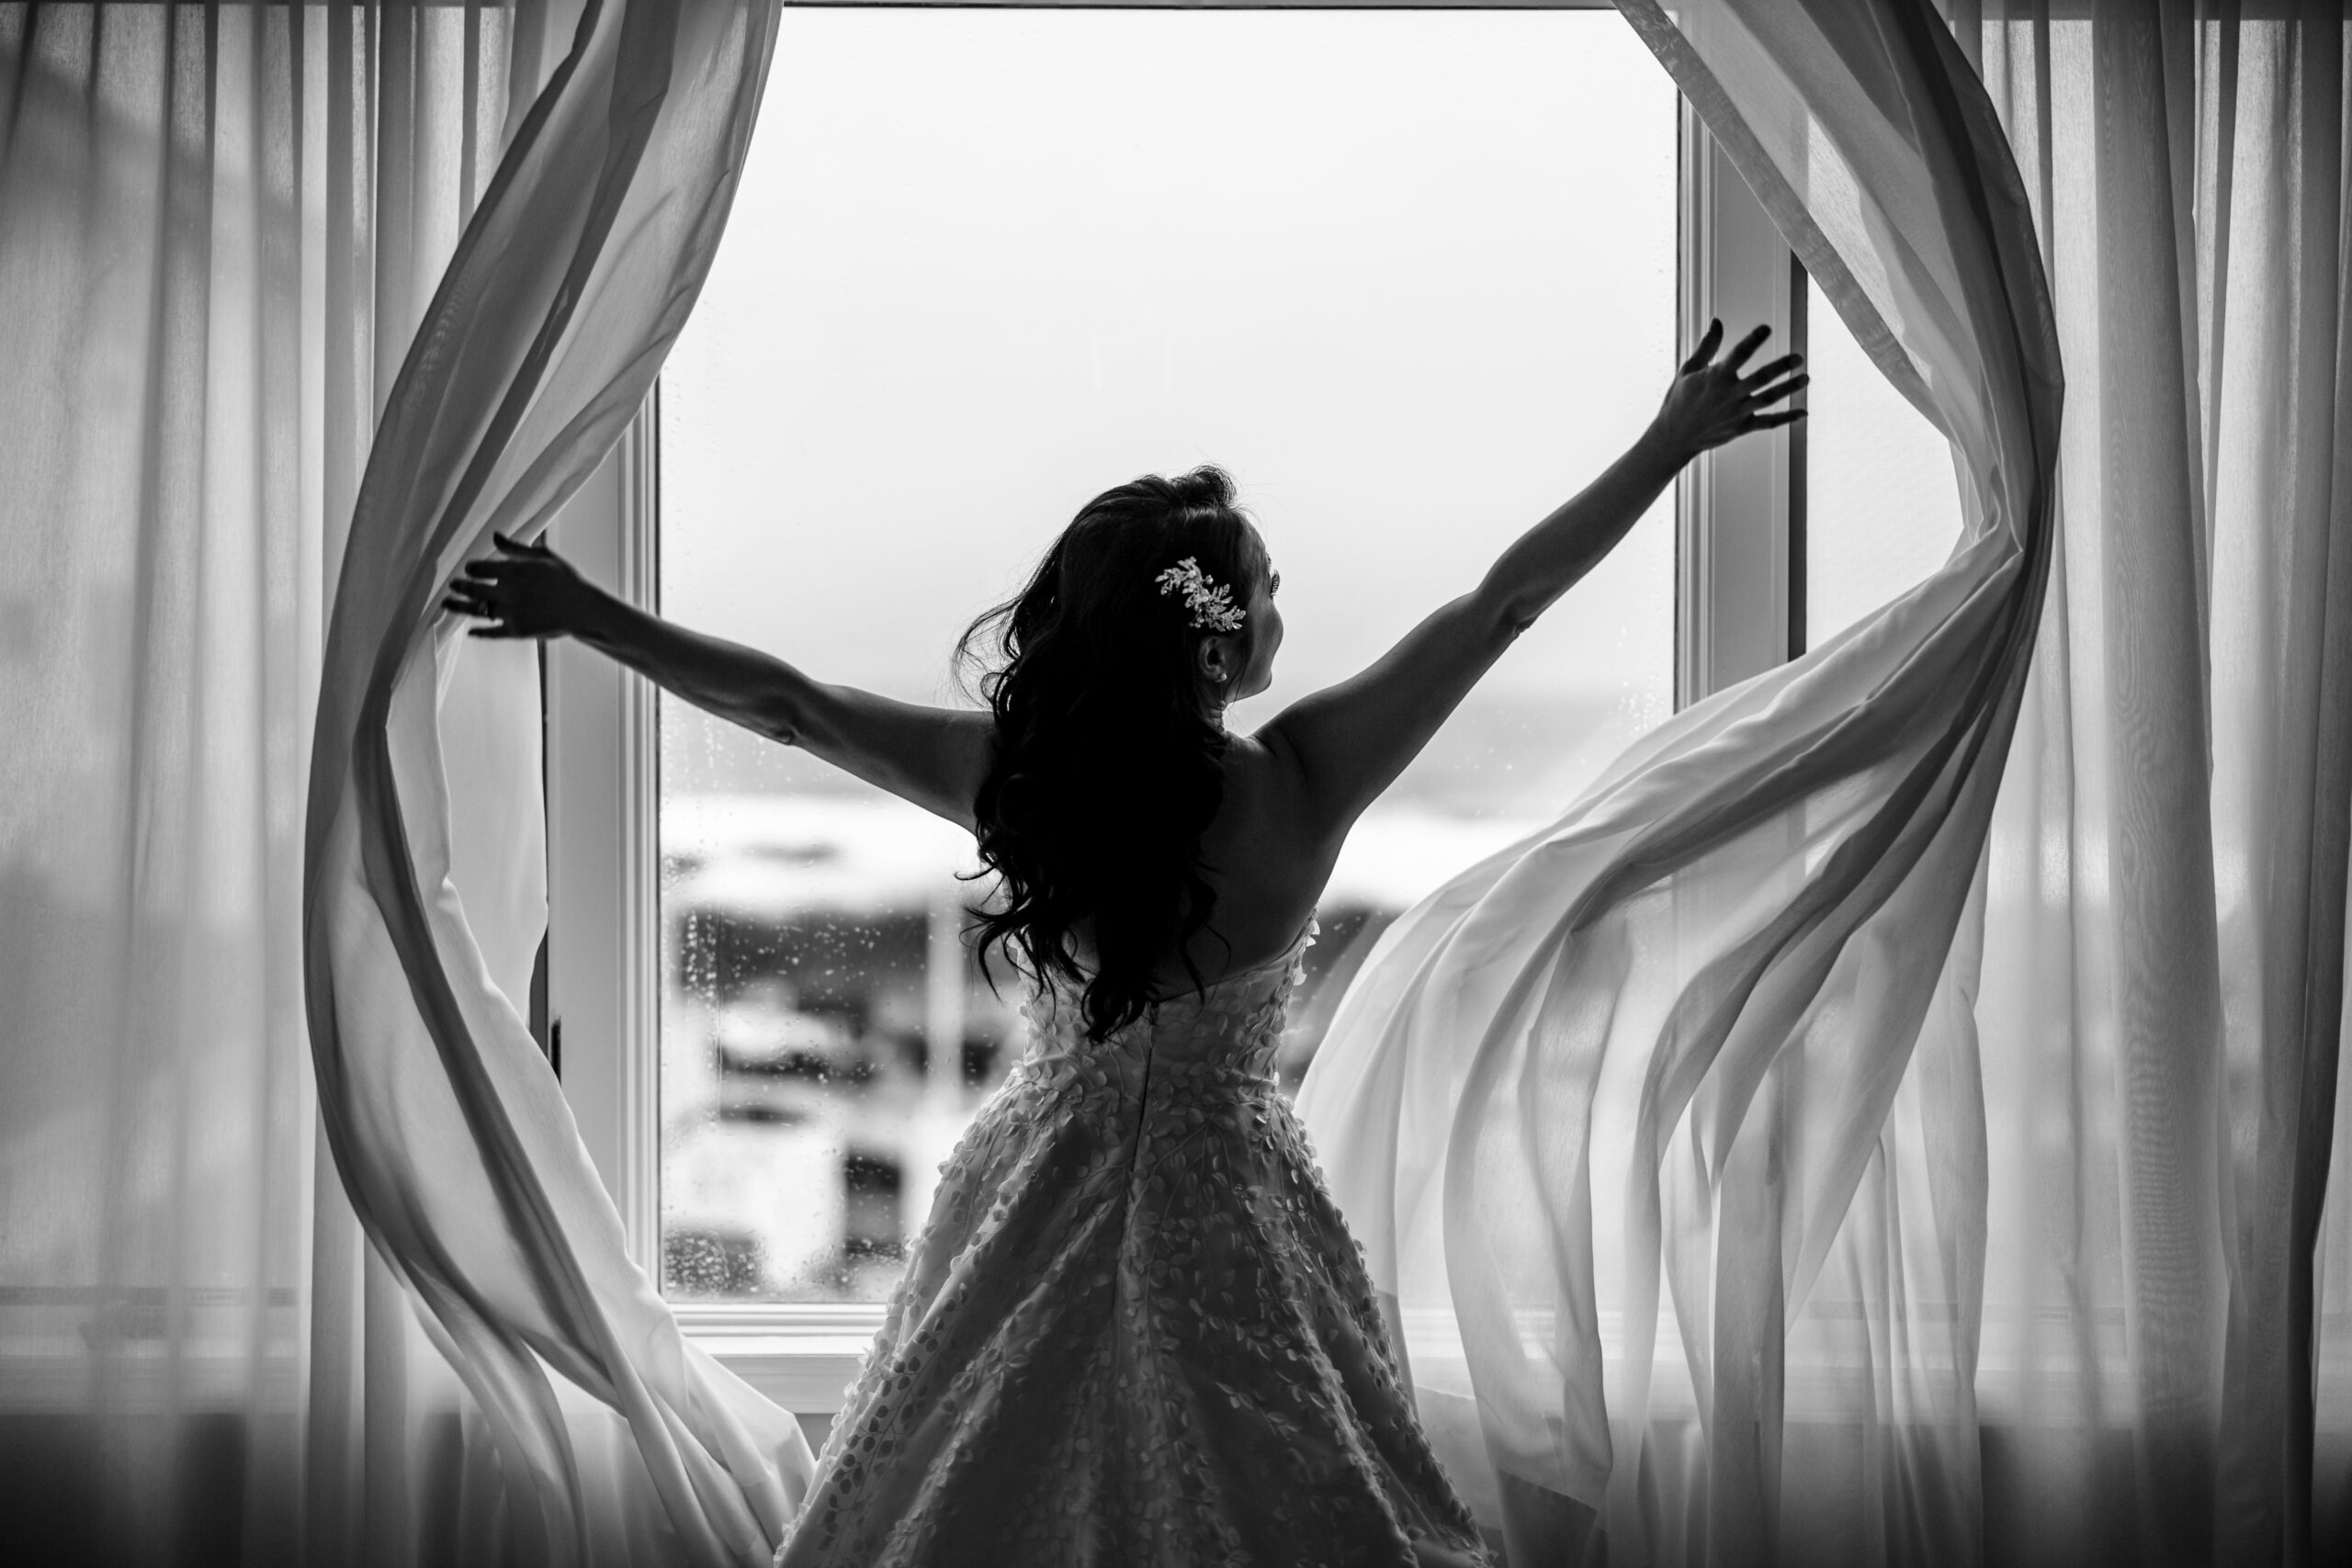 Graceful bride portrait as she opens the curtains on her wedding day, welcoming the light of a new beginning. This elegant moment was skillfully captured by North Jersey wedding photographer Jarot Bocanegra